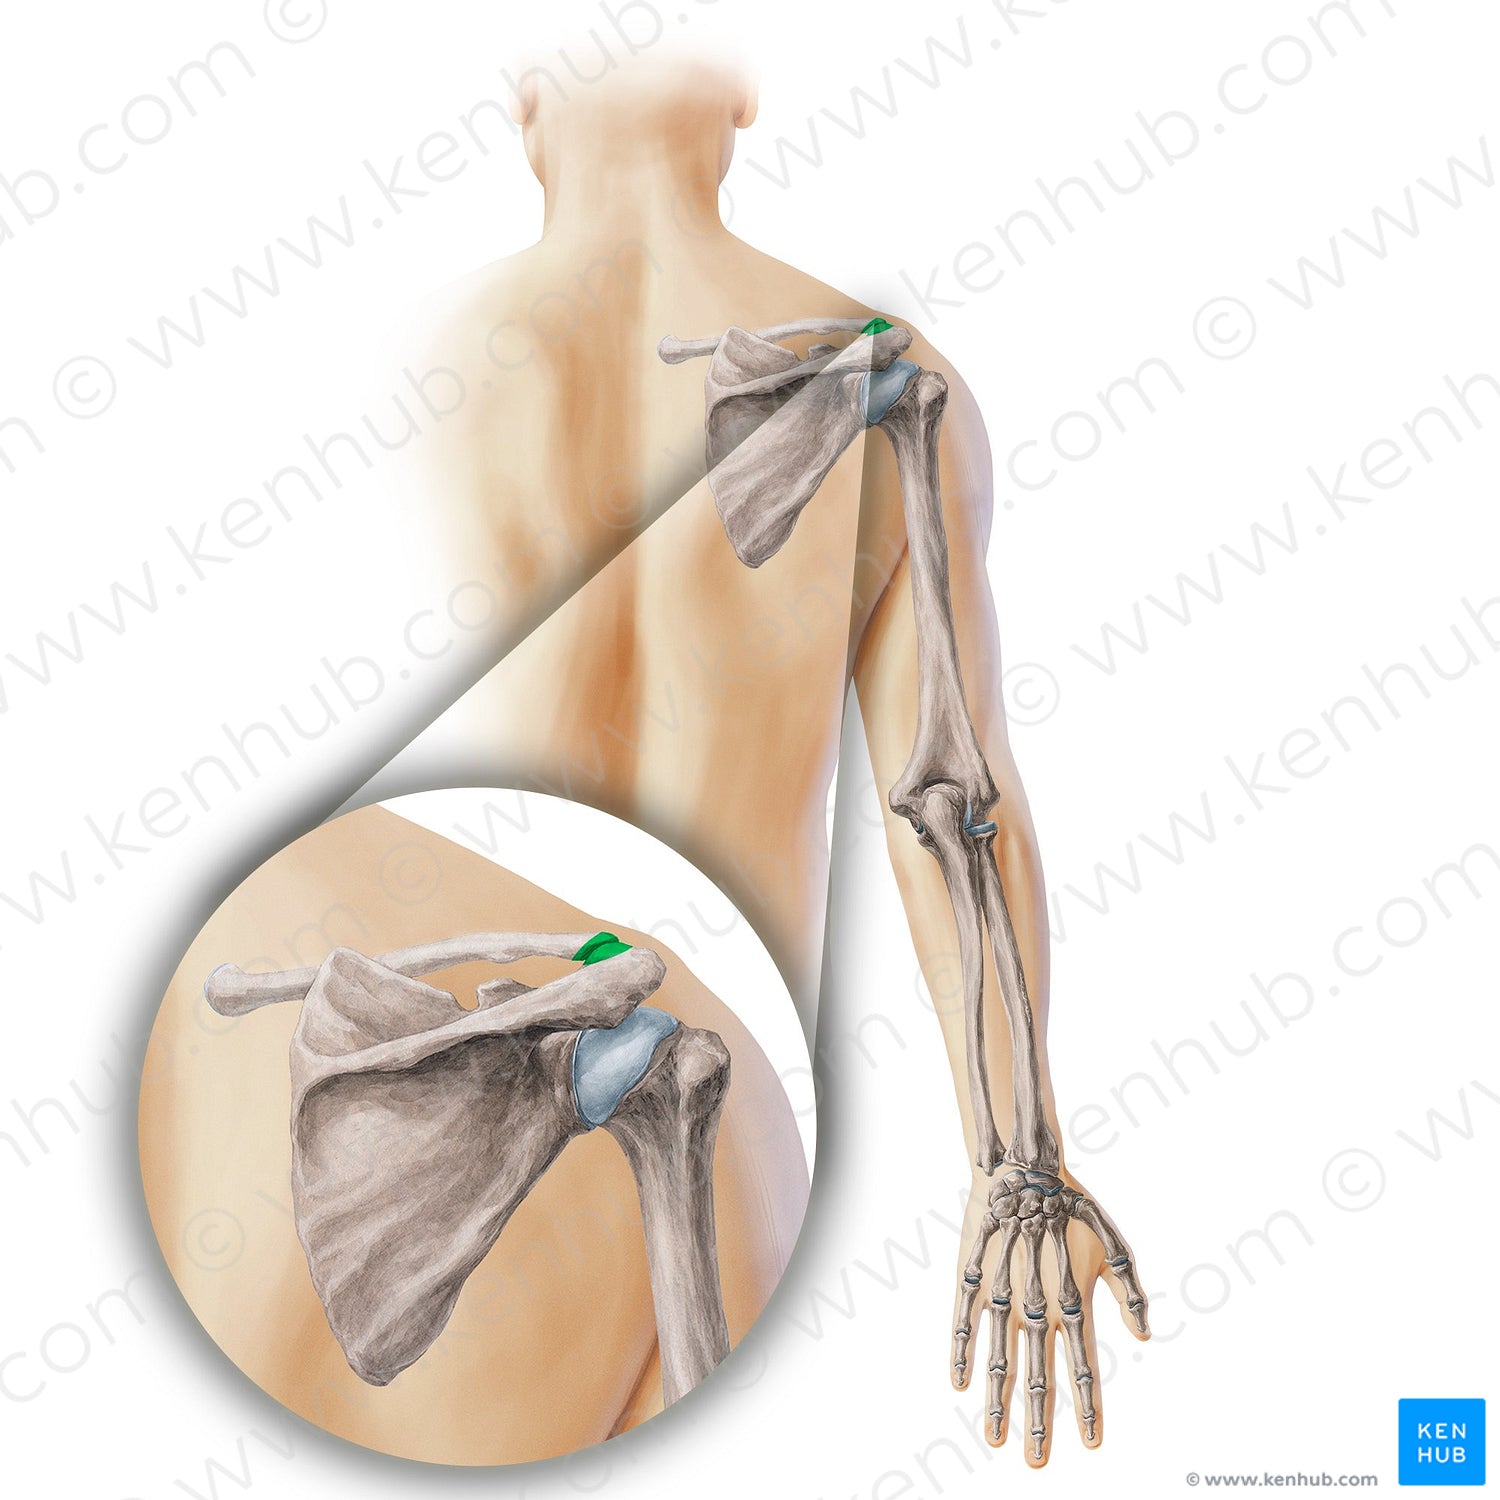 Acromioclavicular joint (#19856)